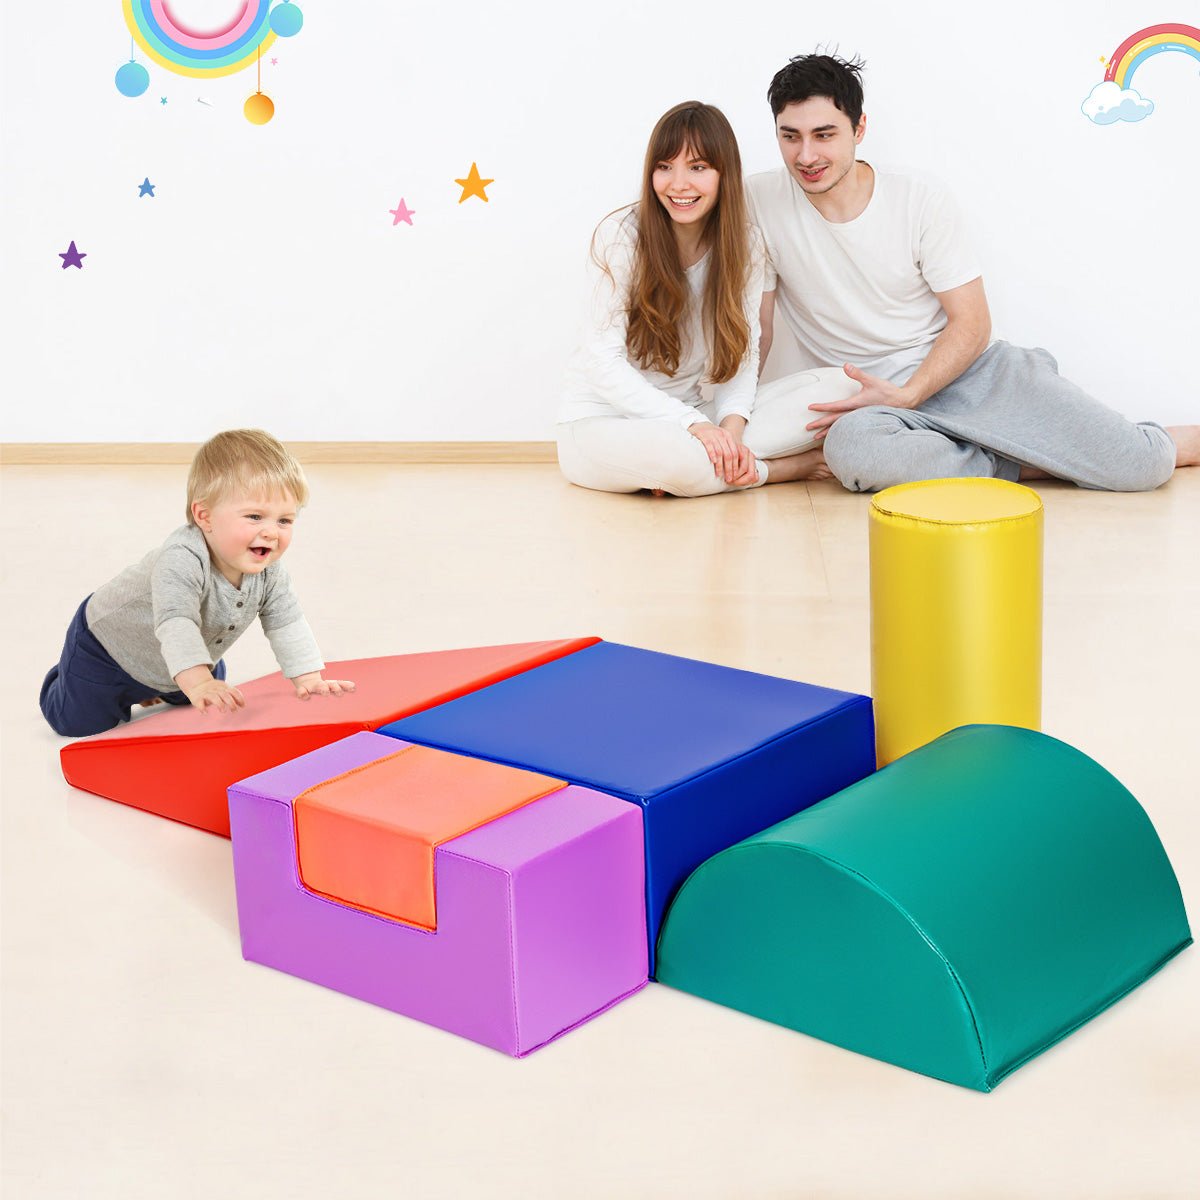 Adventure Zone: Red 6-Piece Foam Blocks Set for Children's Crawling and Climbing